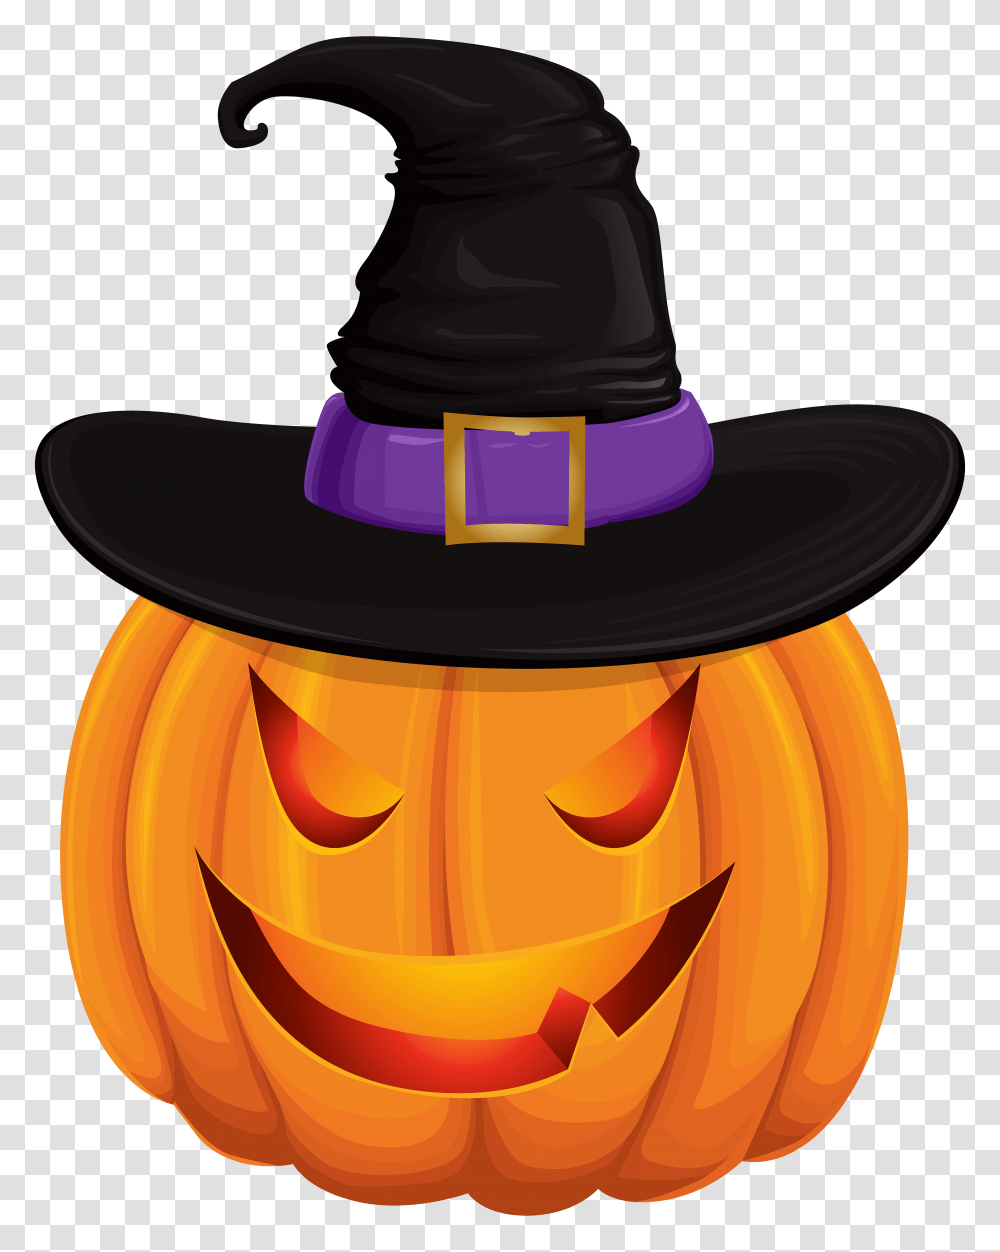 Halloween Pumpkin With Witch Hat Clip Gallery, Apparel, Cowboy Hat Transparent Png